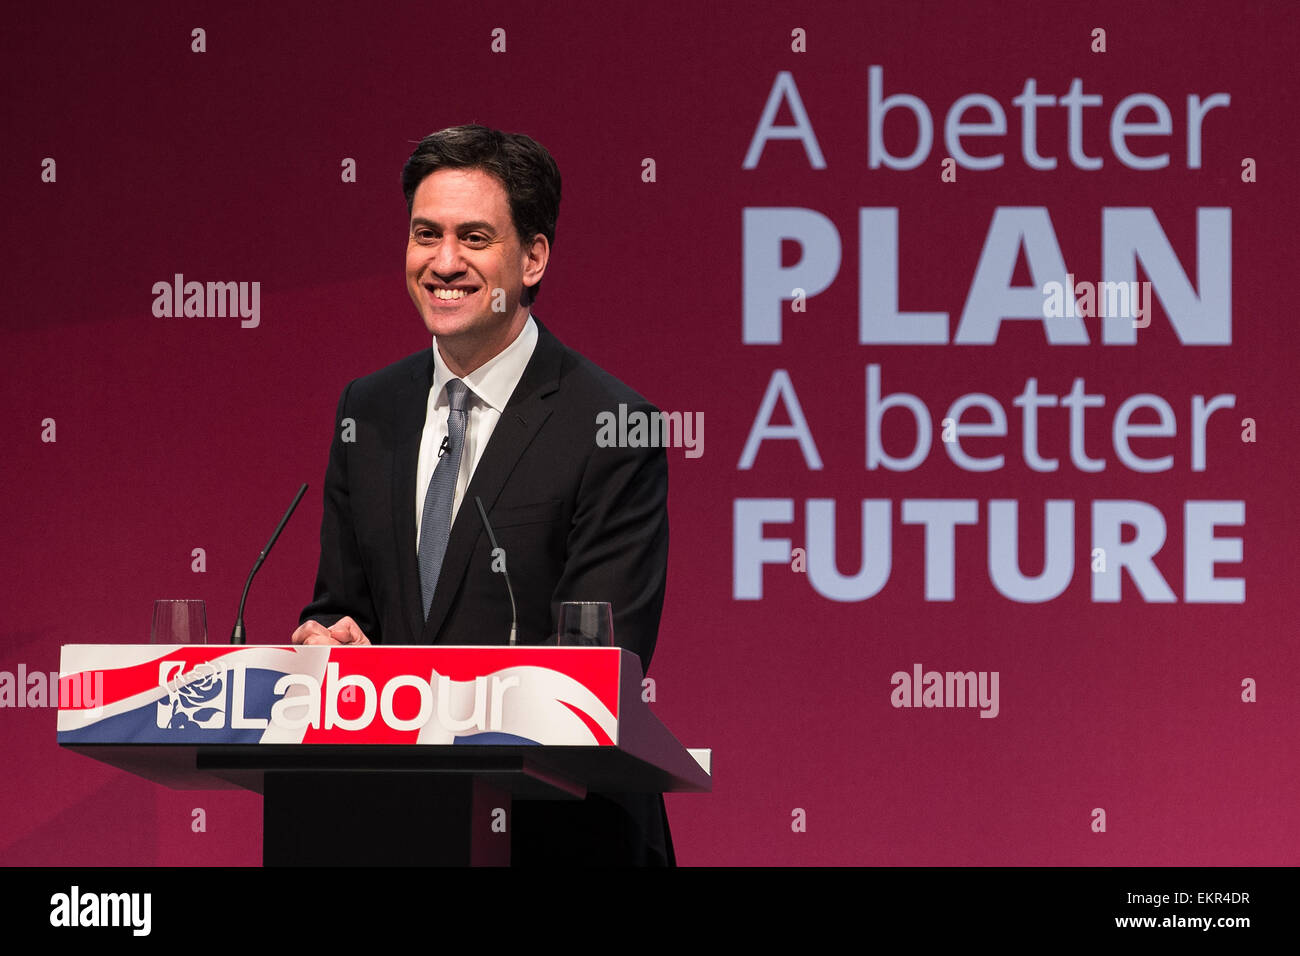 Manchester, UK. 13th April, 2015. Labour Party leader ED MILIBAND launches the Labour Party manifesto ahead of the General Election at the Old Granada Studios in Manchester , UK . Credit:  Joel Goodman/Alamy Live News Stock Photo